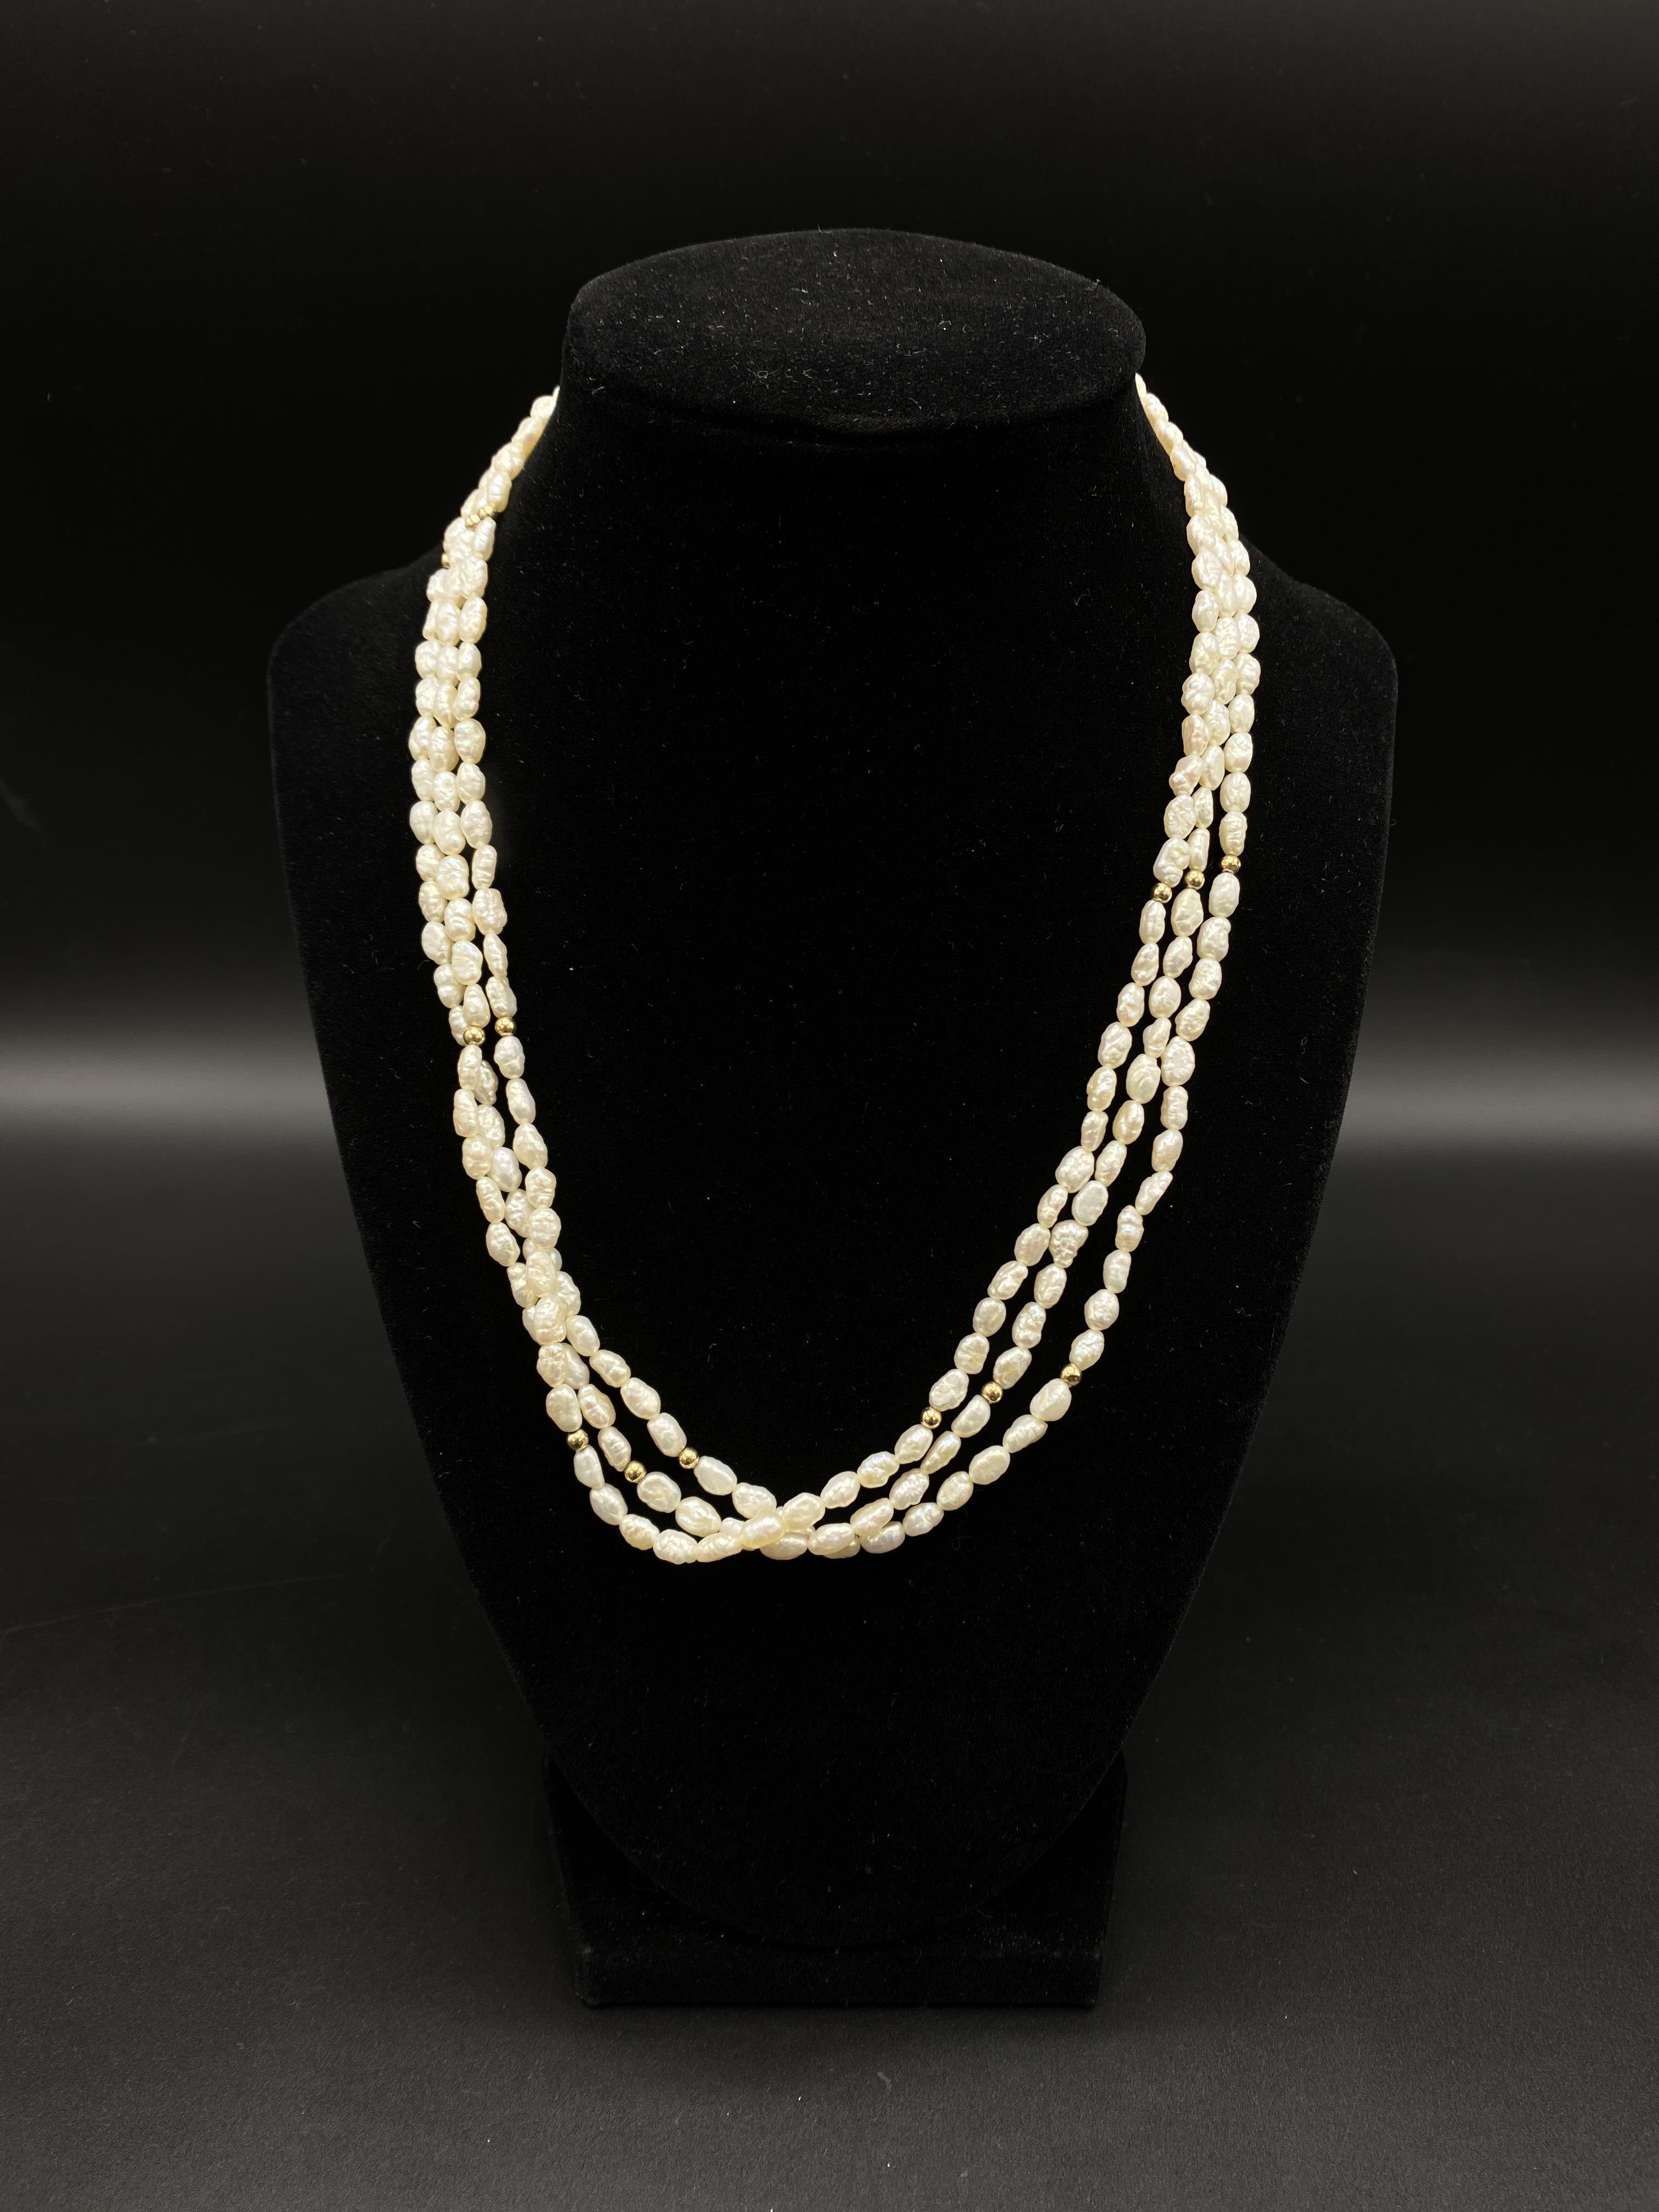 Two pearl necklaces with gold clasps - Image 8 of 9